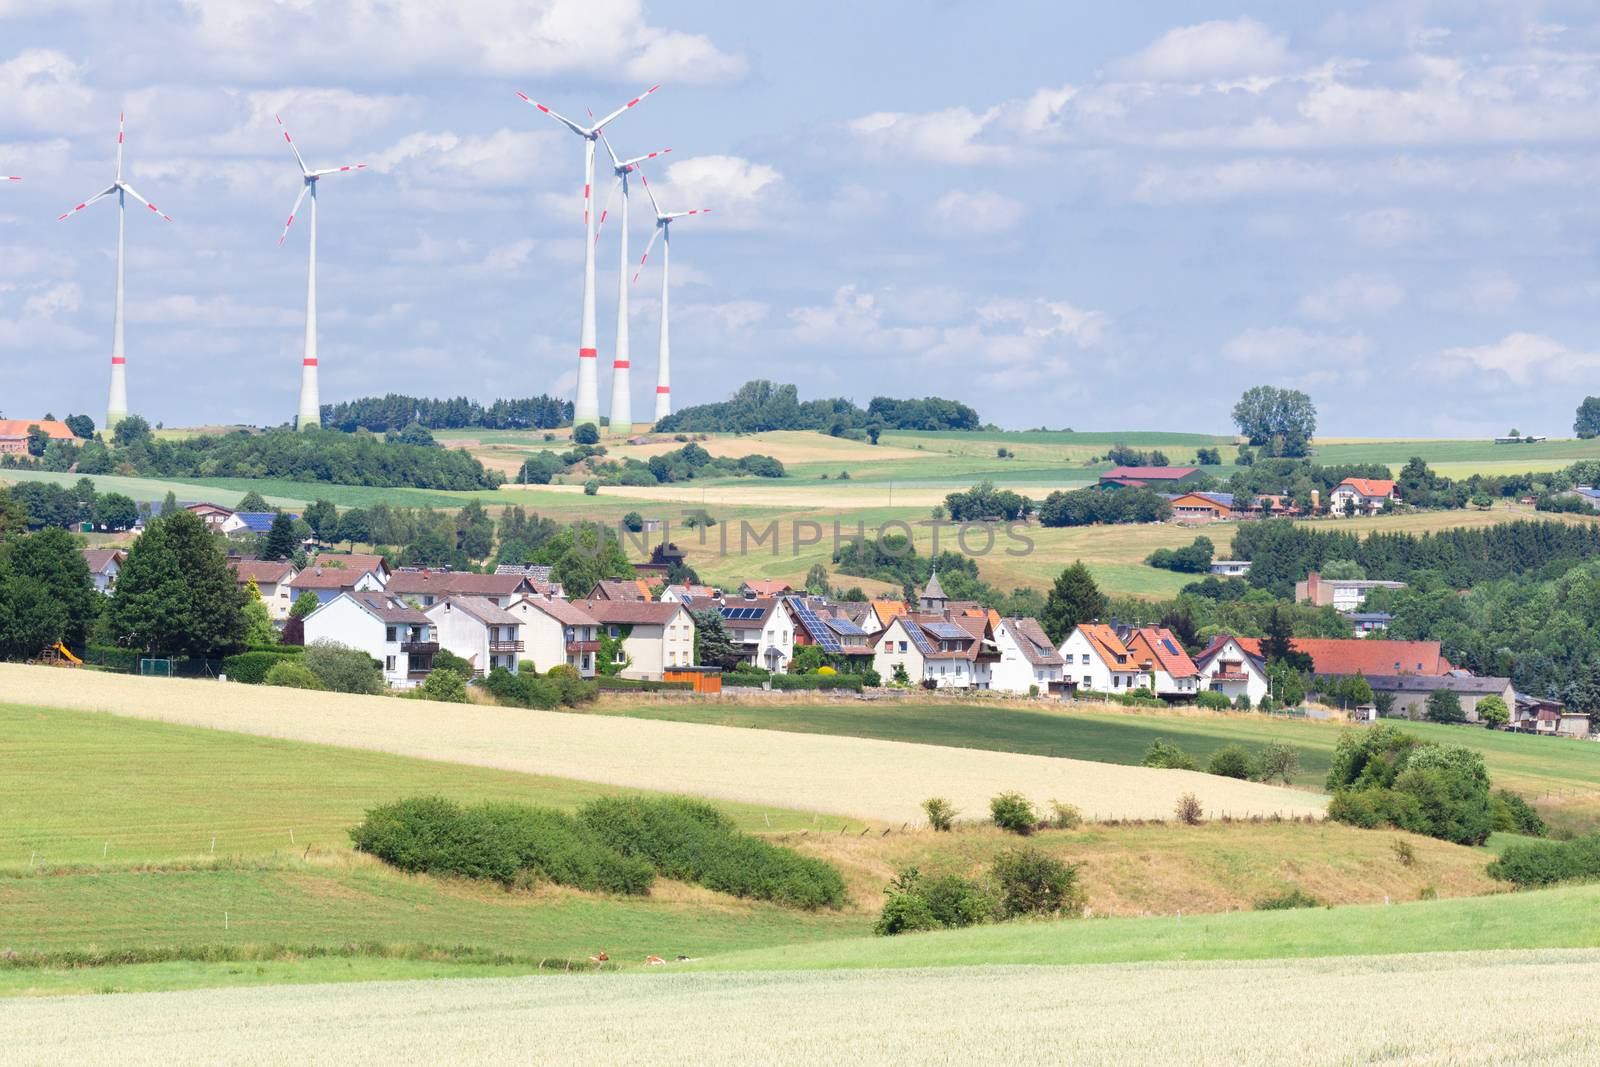 German village with houses, windmills and corn fields by BenSchonewille